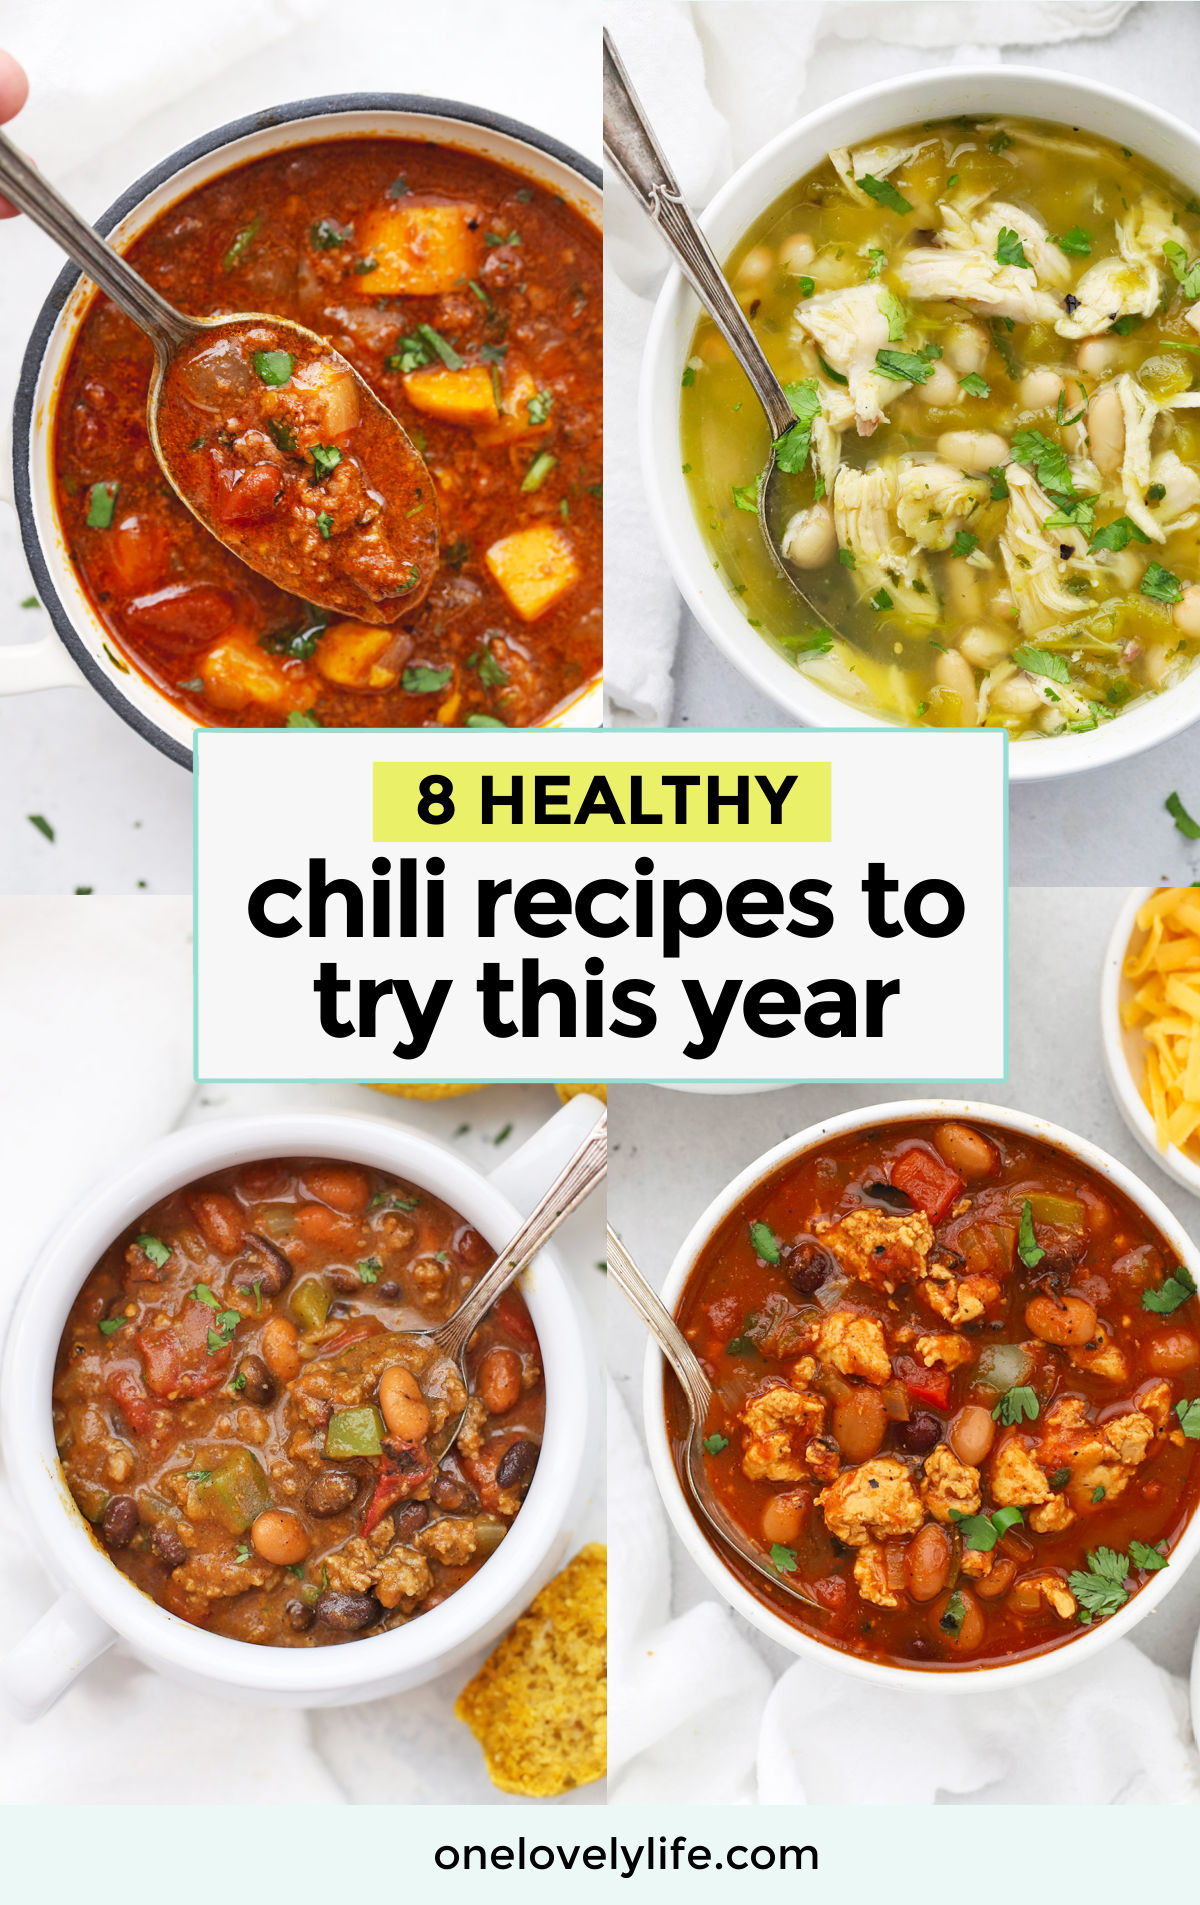 We LOVE healthy chili recipes and these easy recipes always deliver! Choose from gluten-free, paleo, and vegetarian options! // instant pot chili recipe // slow cooker chili recipe // crock pot chili recipe // crockpot chili recipe // vegan chili recipe // paleo chili recipe // gluten free chili recipes / healthy chili recipe / healthy dinner recipes // healthy lunch recipes / easy chili recipes / gluten free chili recipes / gluten free chili recipe